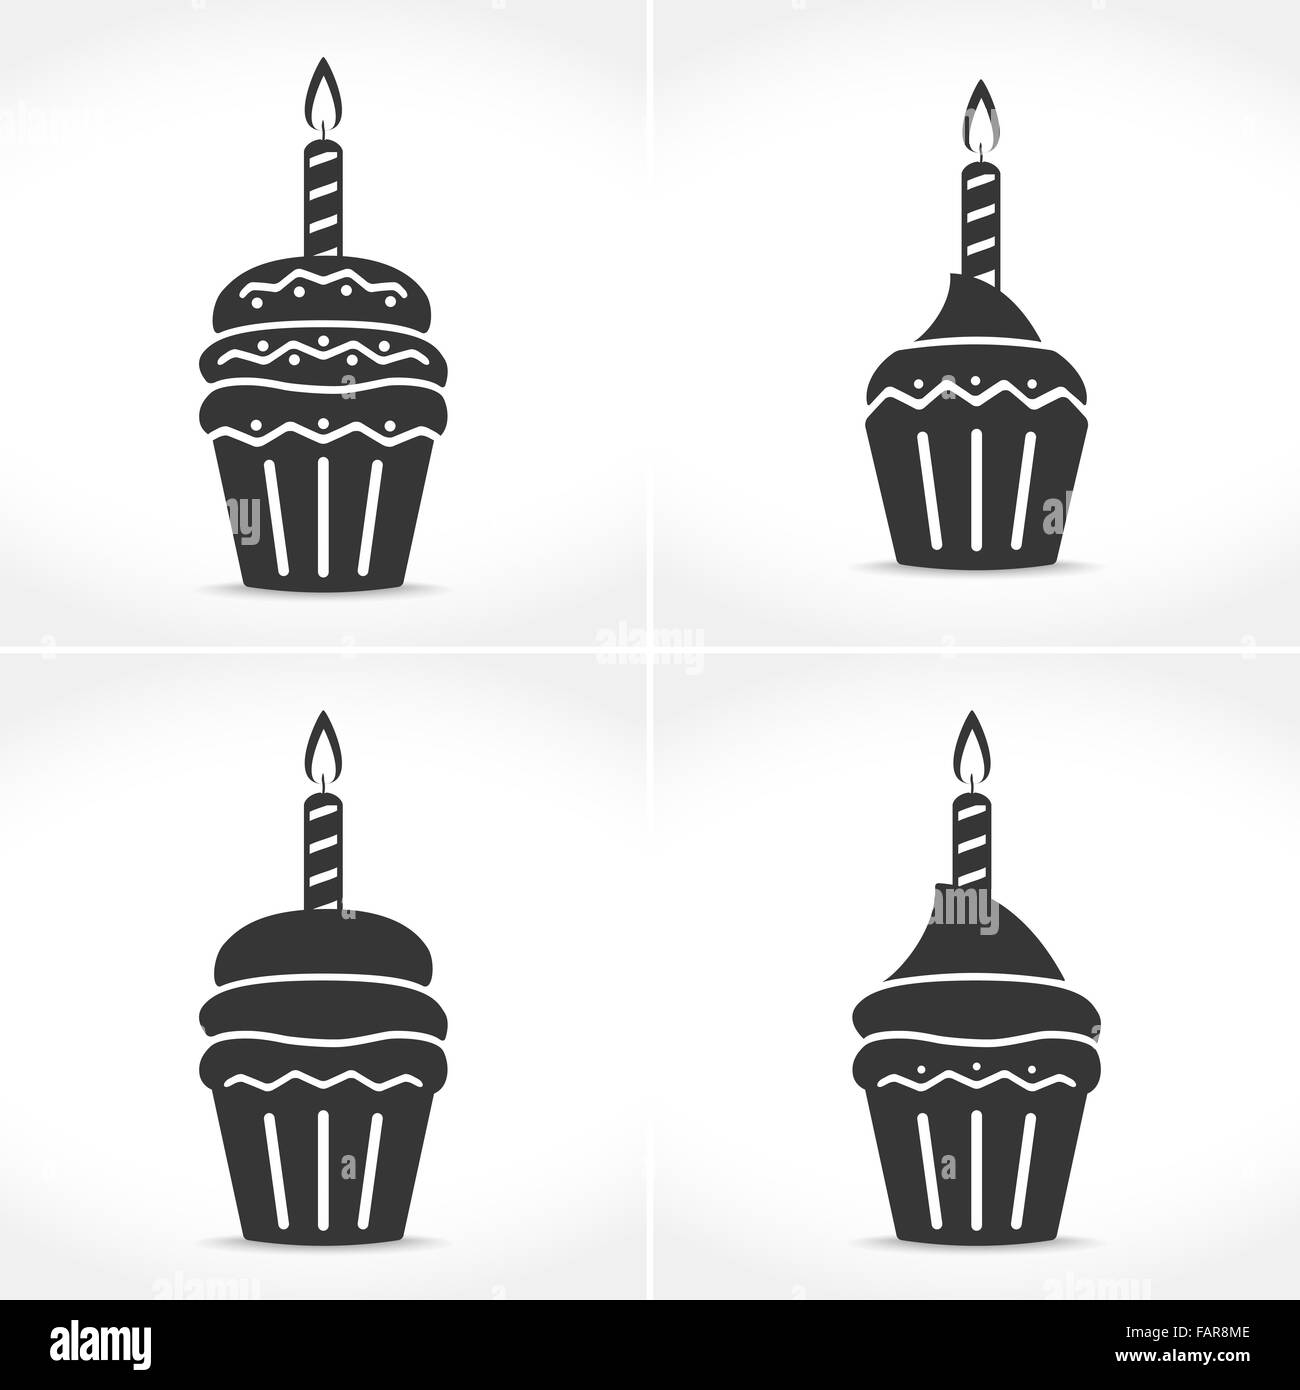 Icons of a birthday cupcakes with candles Stock Photo